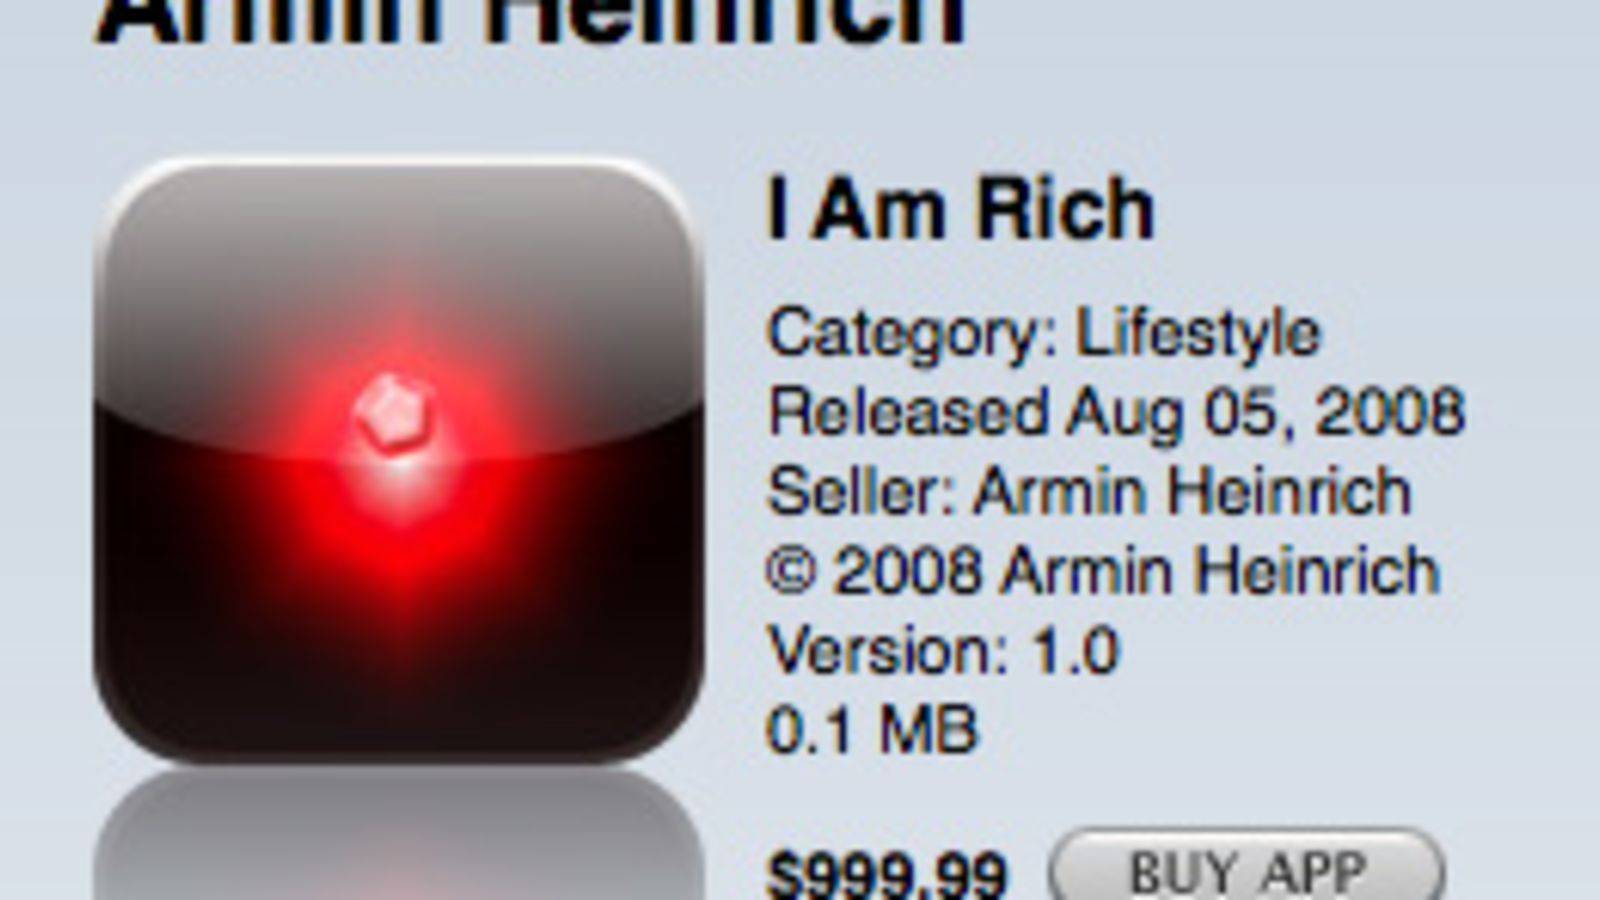 What is the “I Am Rich” App?